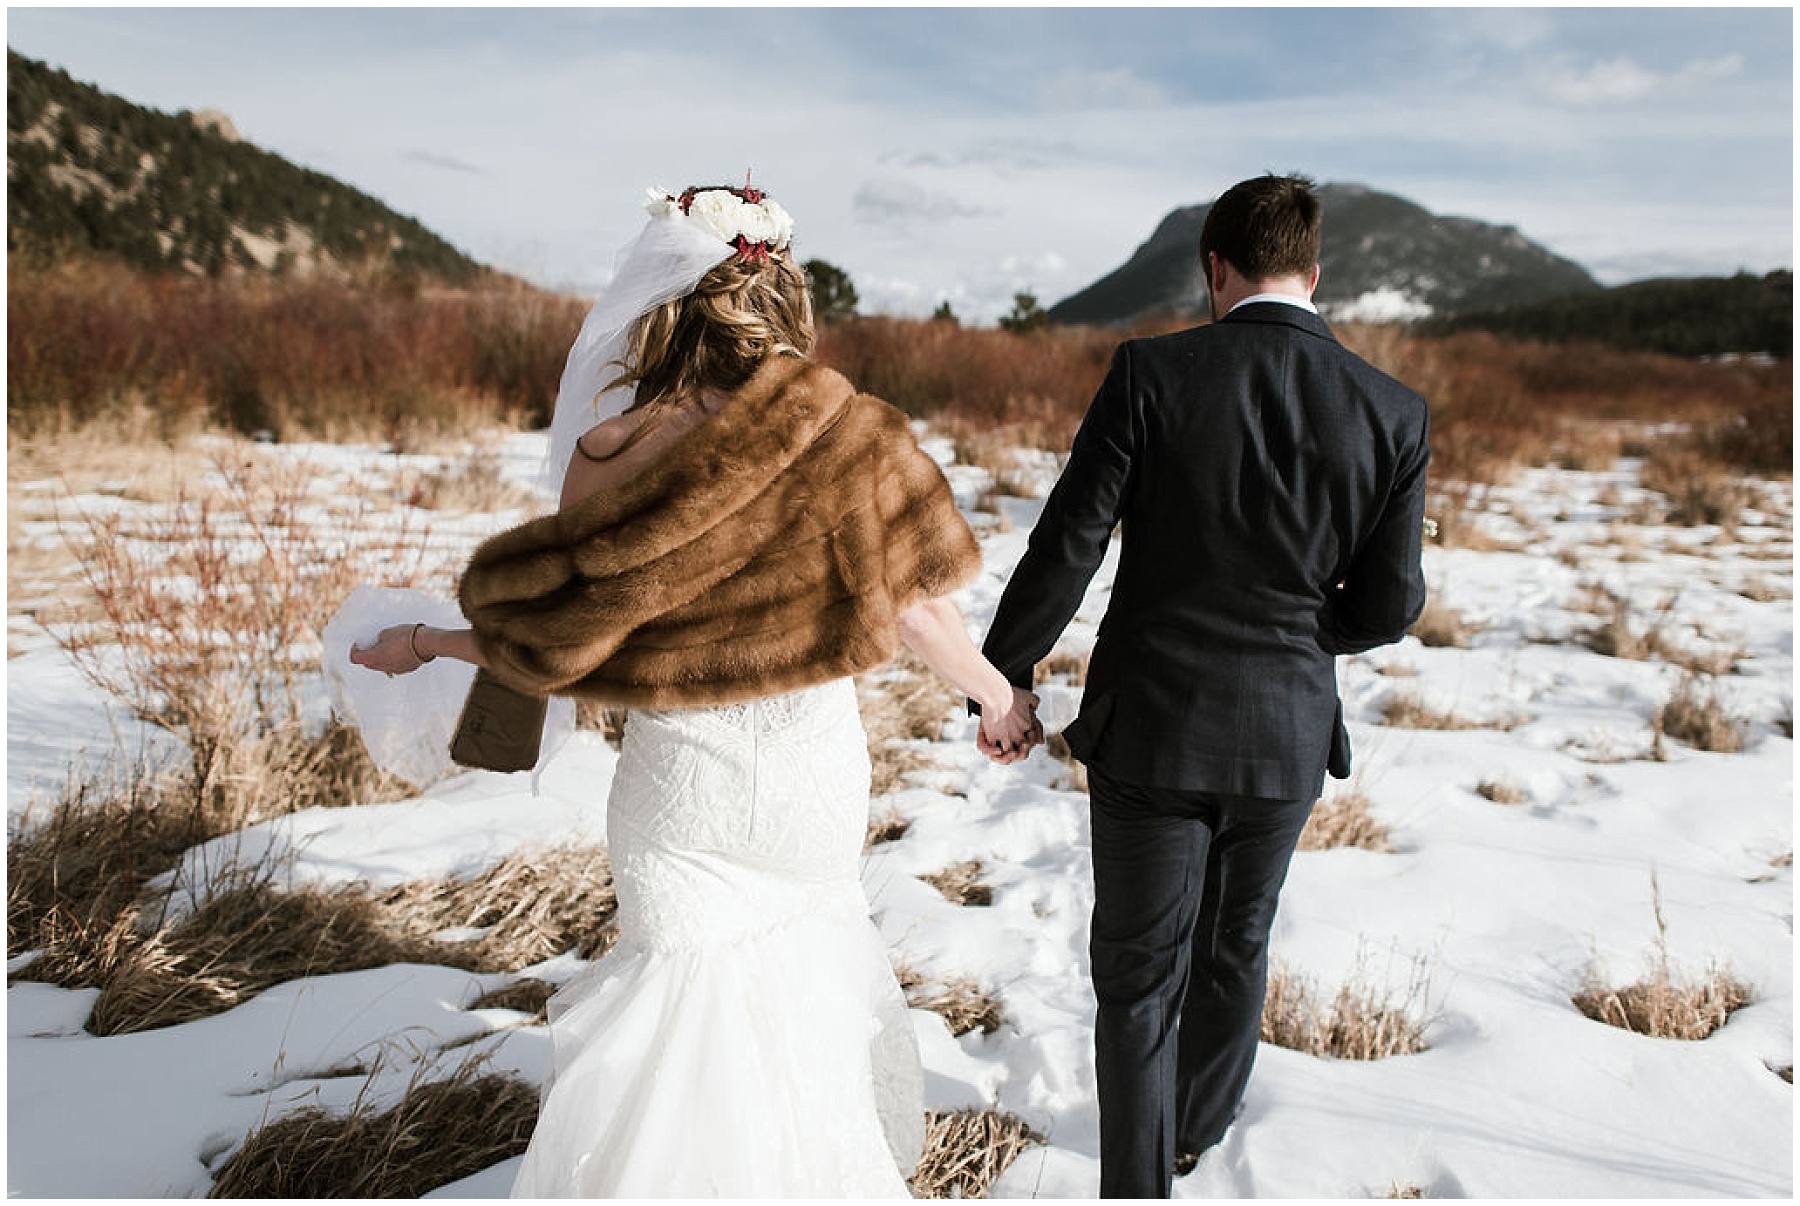 Katesalleyphotography-178_Haley and Dan get married in Estes Park.jpg